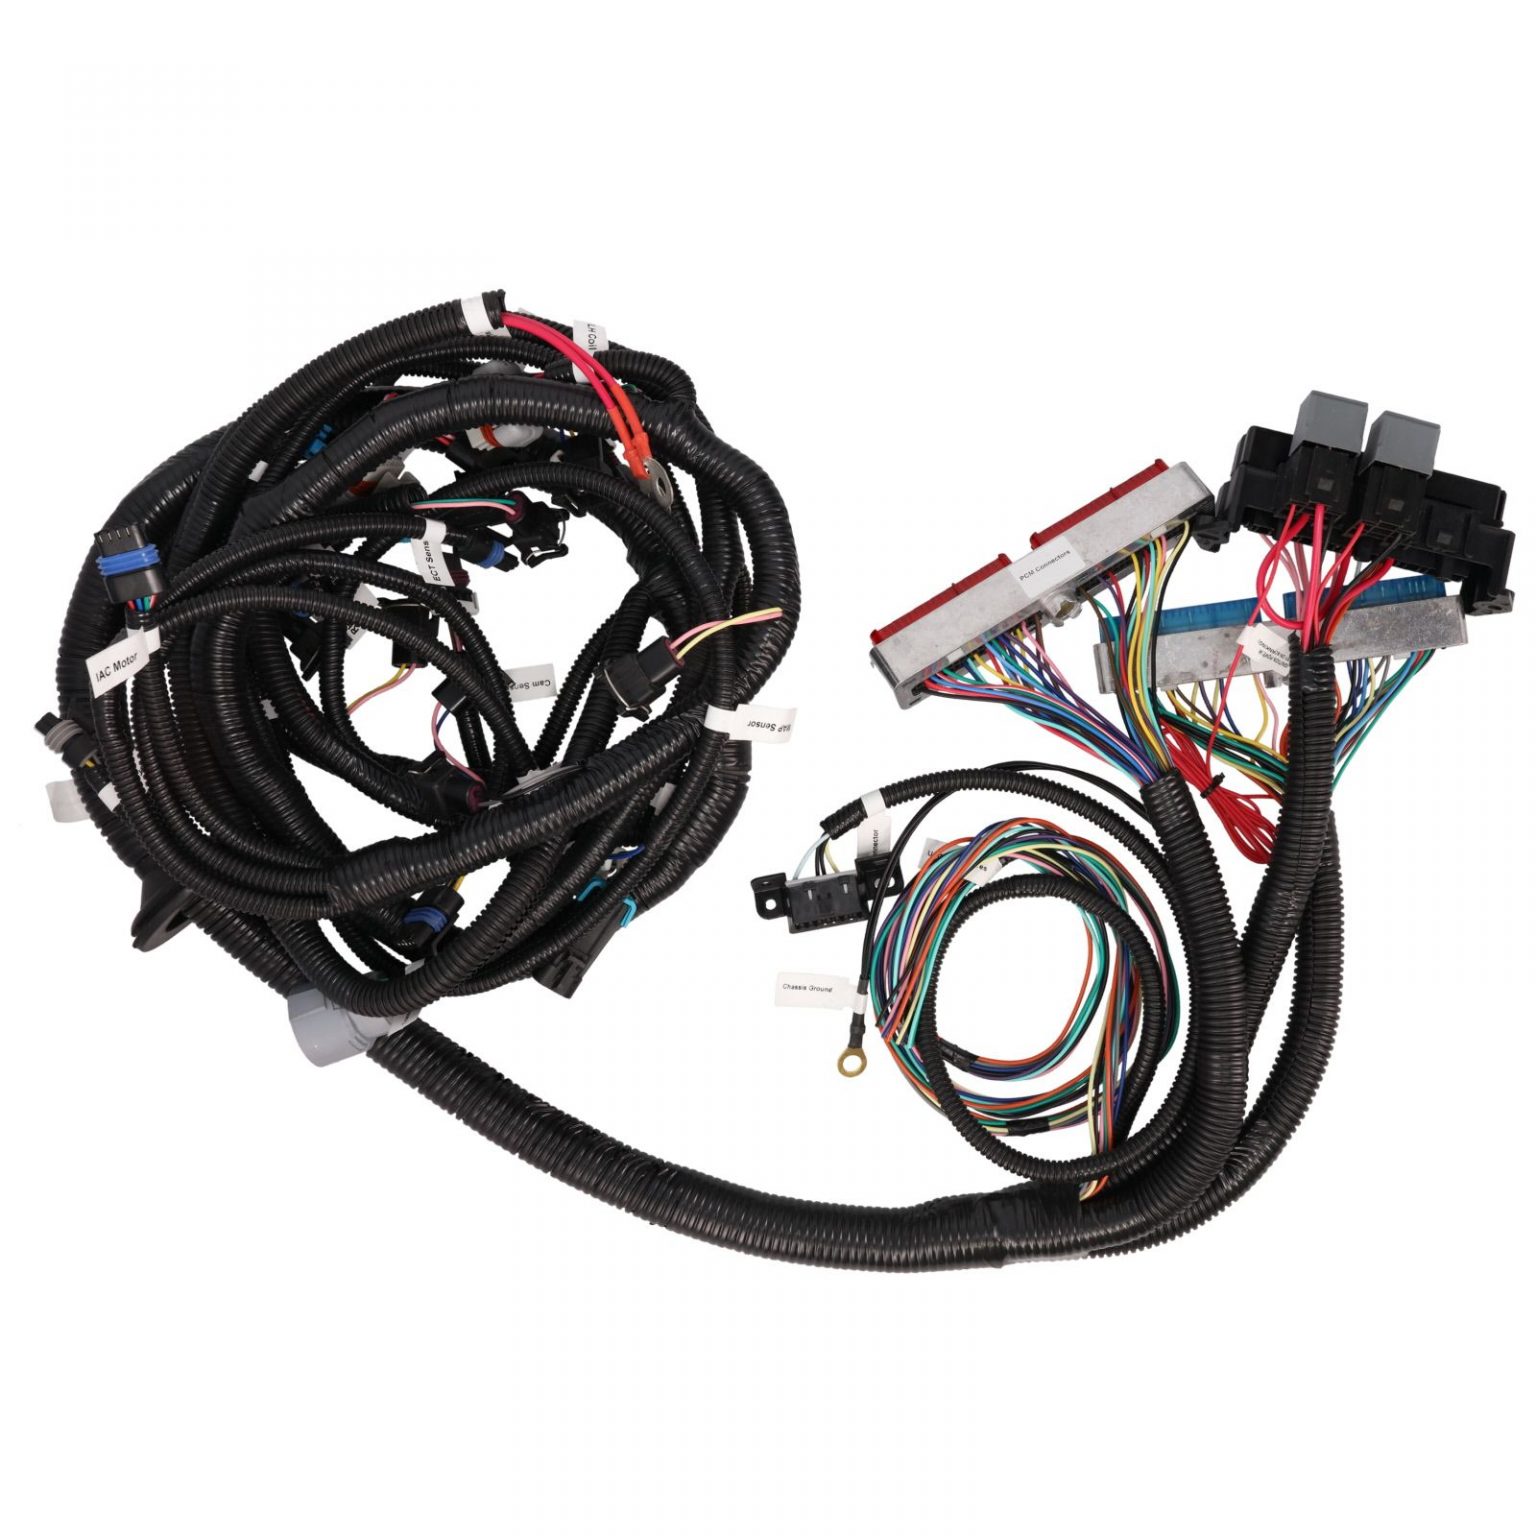 LS Swap Standalone LS Engine Wiring Harness With L E Drive By Cable KarlKustoms Com